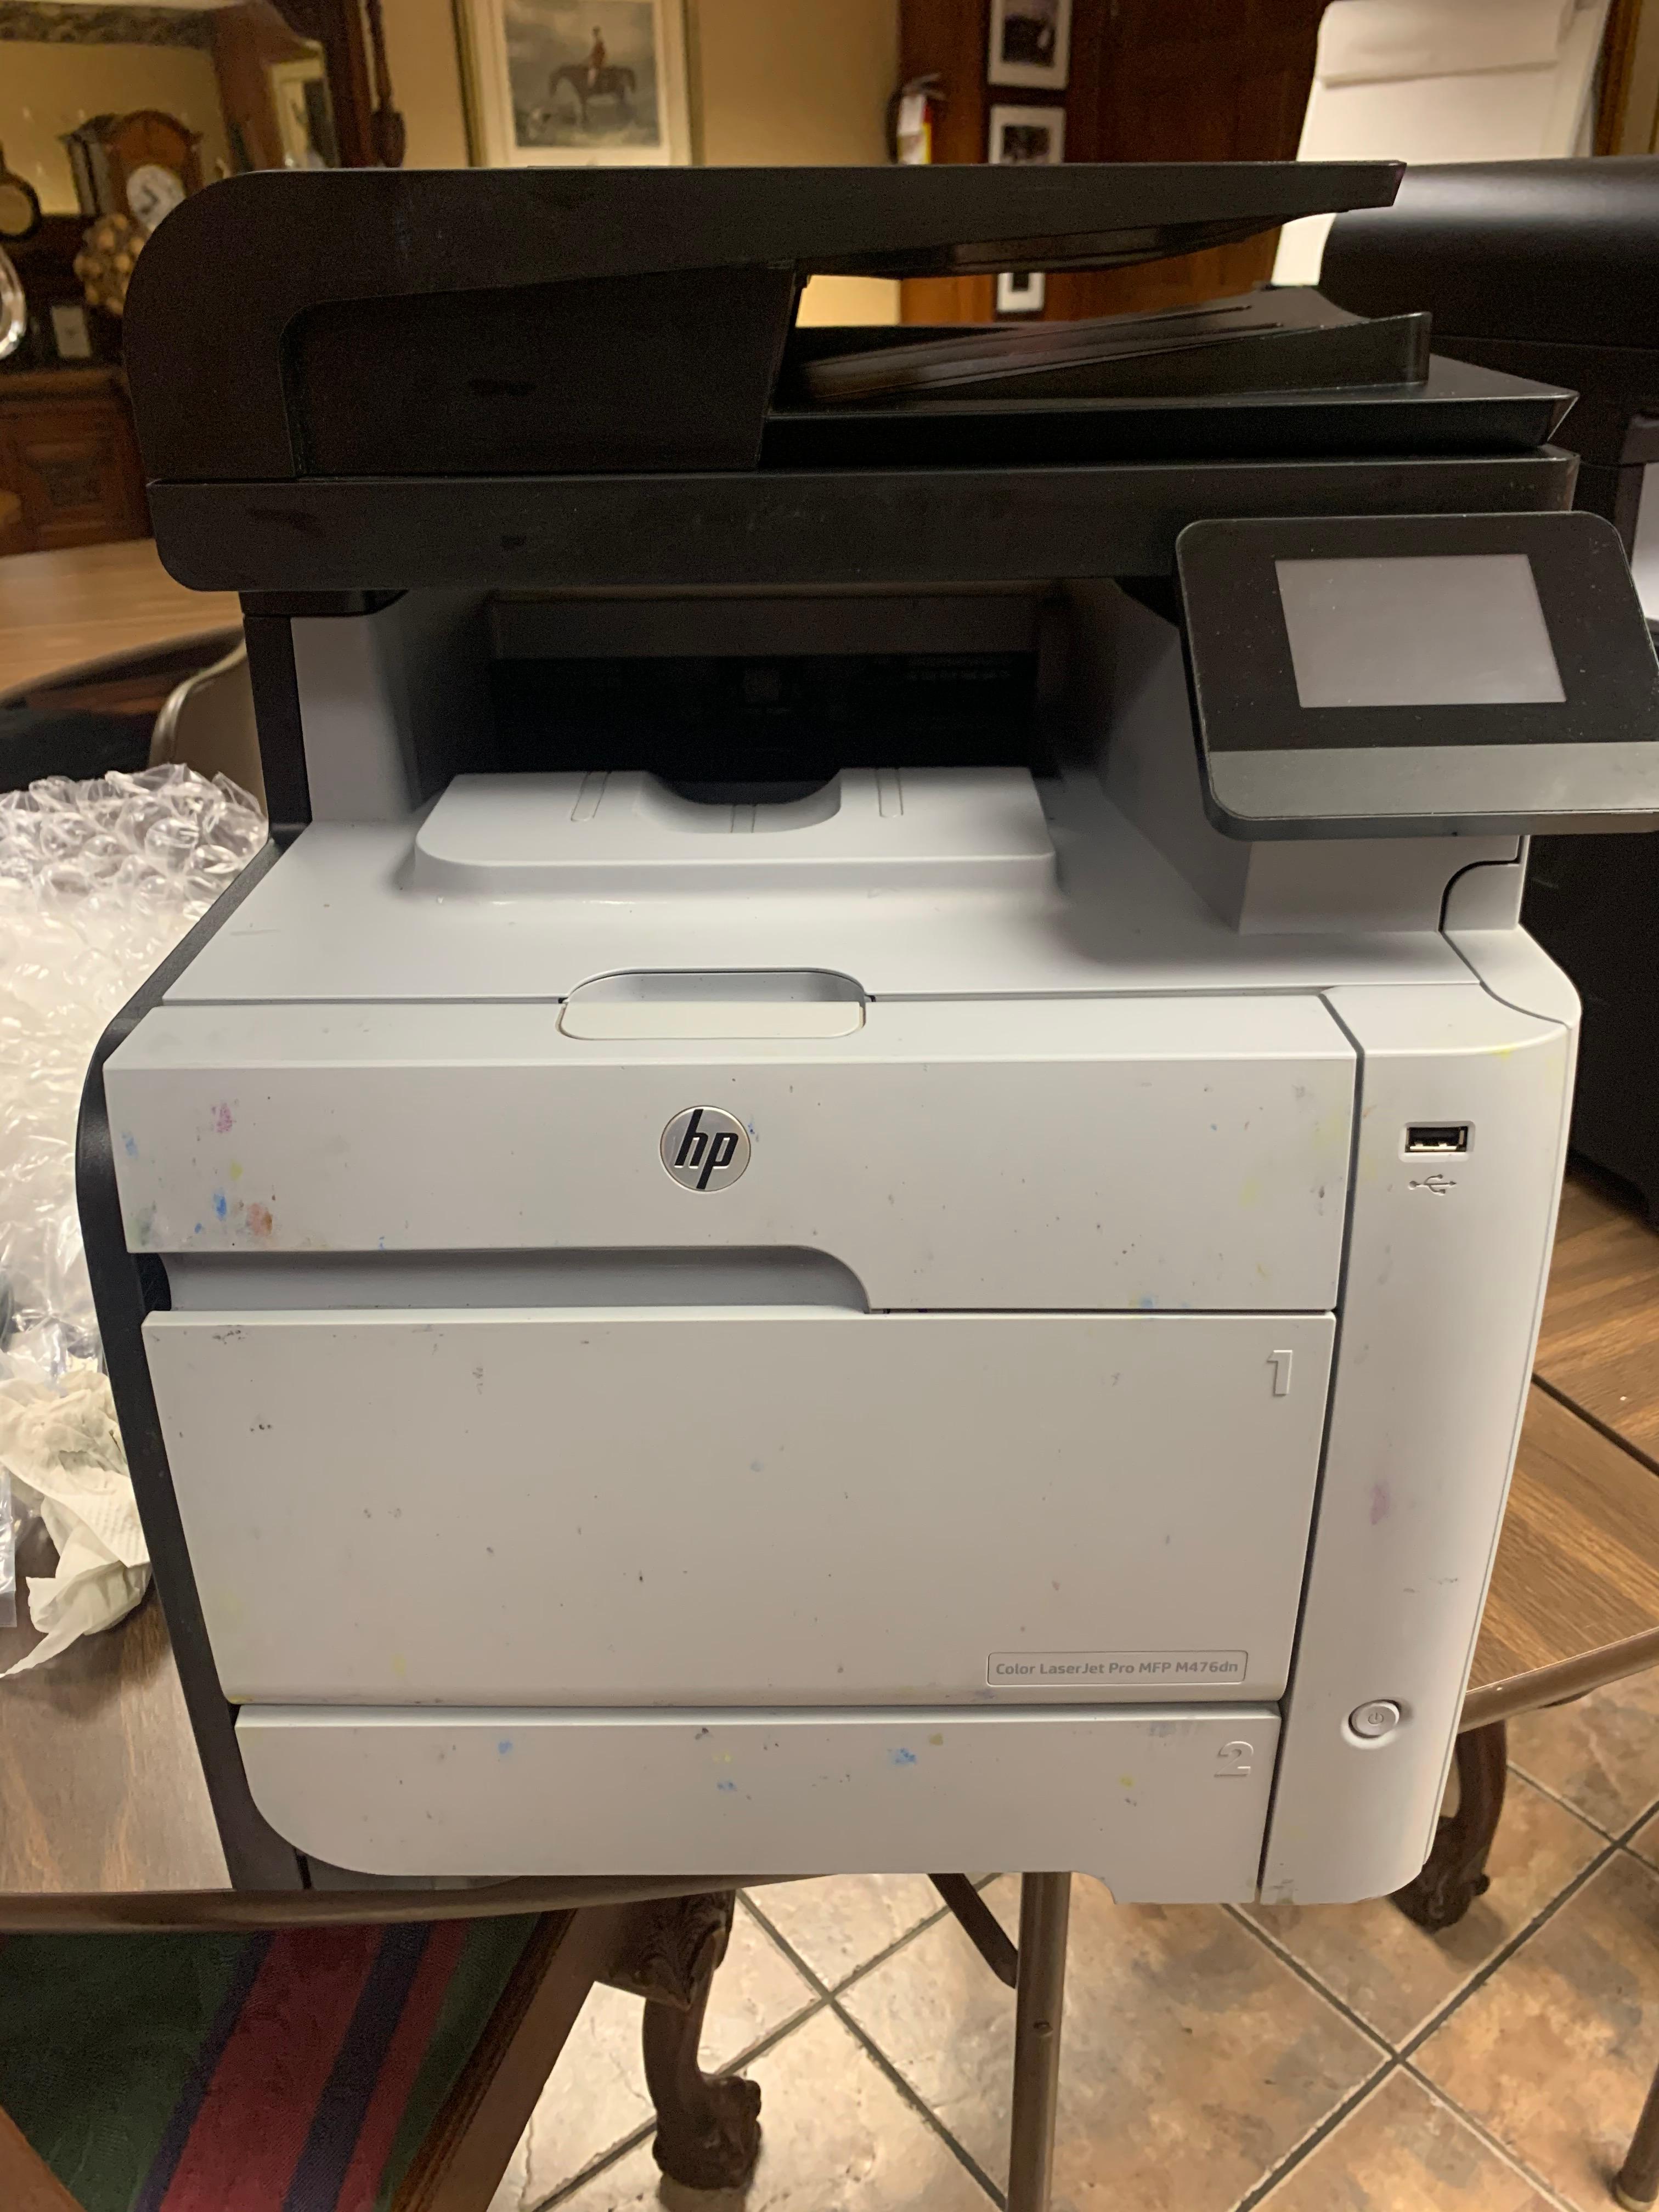 the bashed dirty returned printer